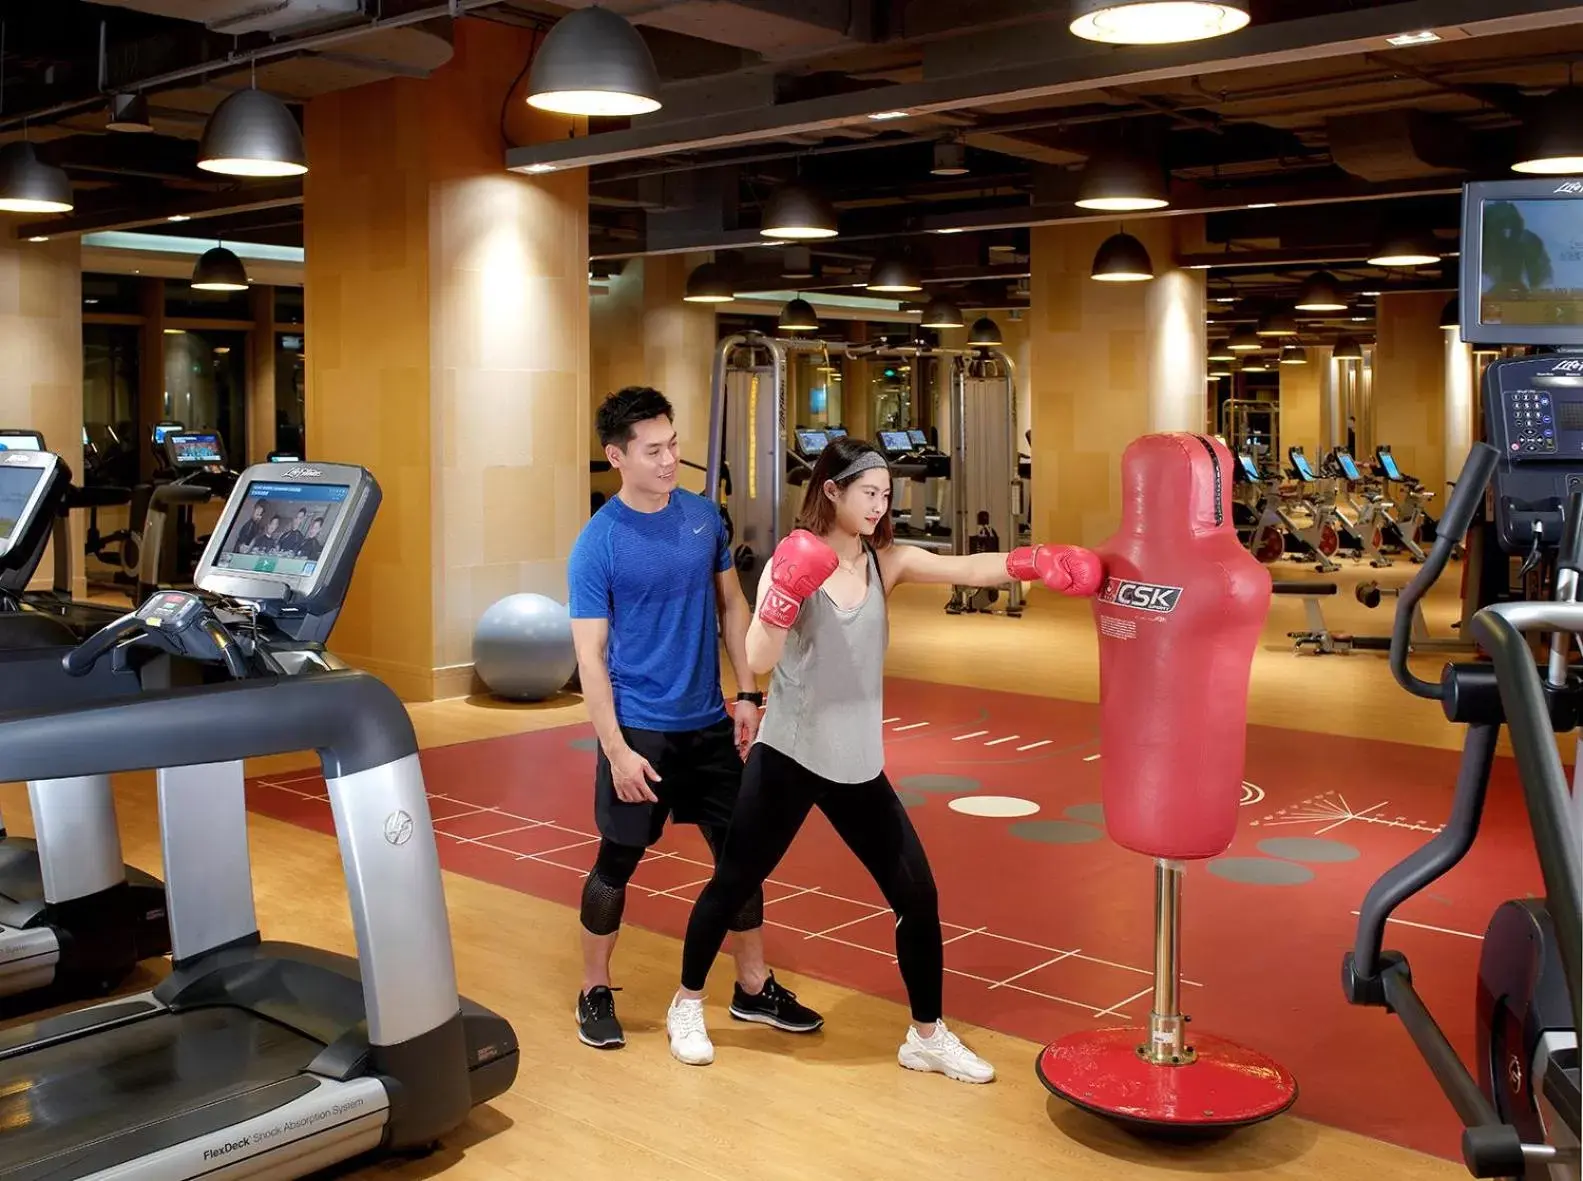 Fitness centre/facilities in Kerry Hotel, Beijing